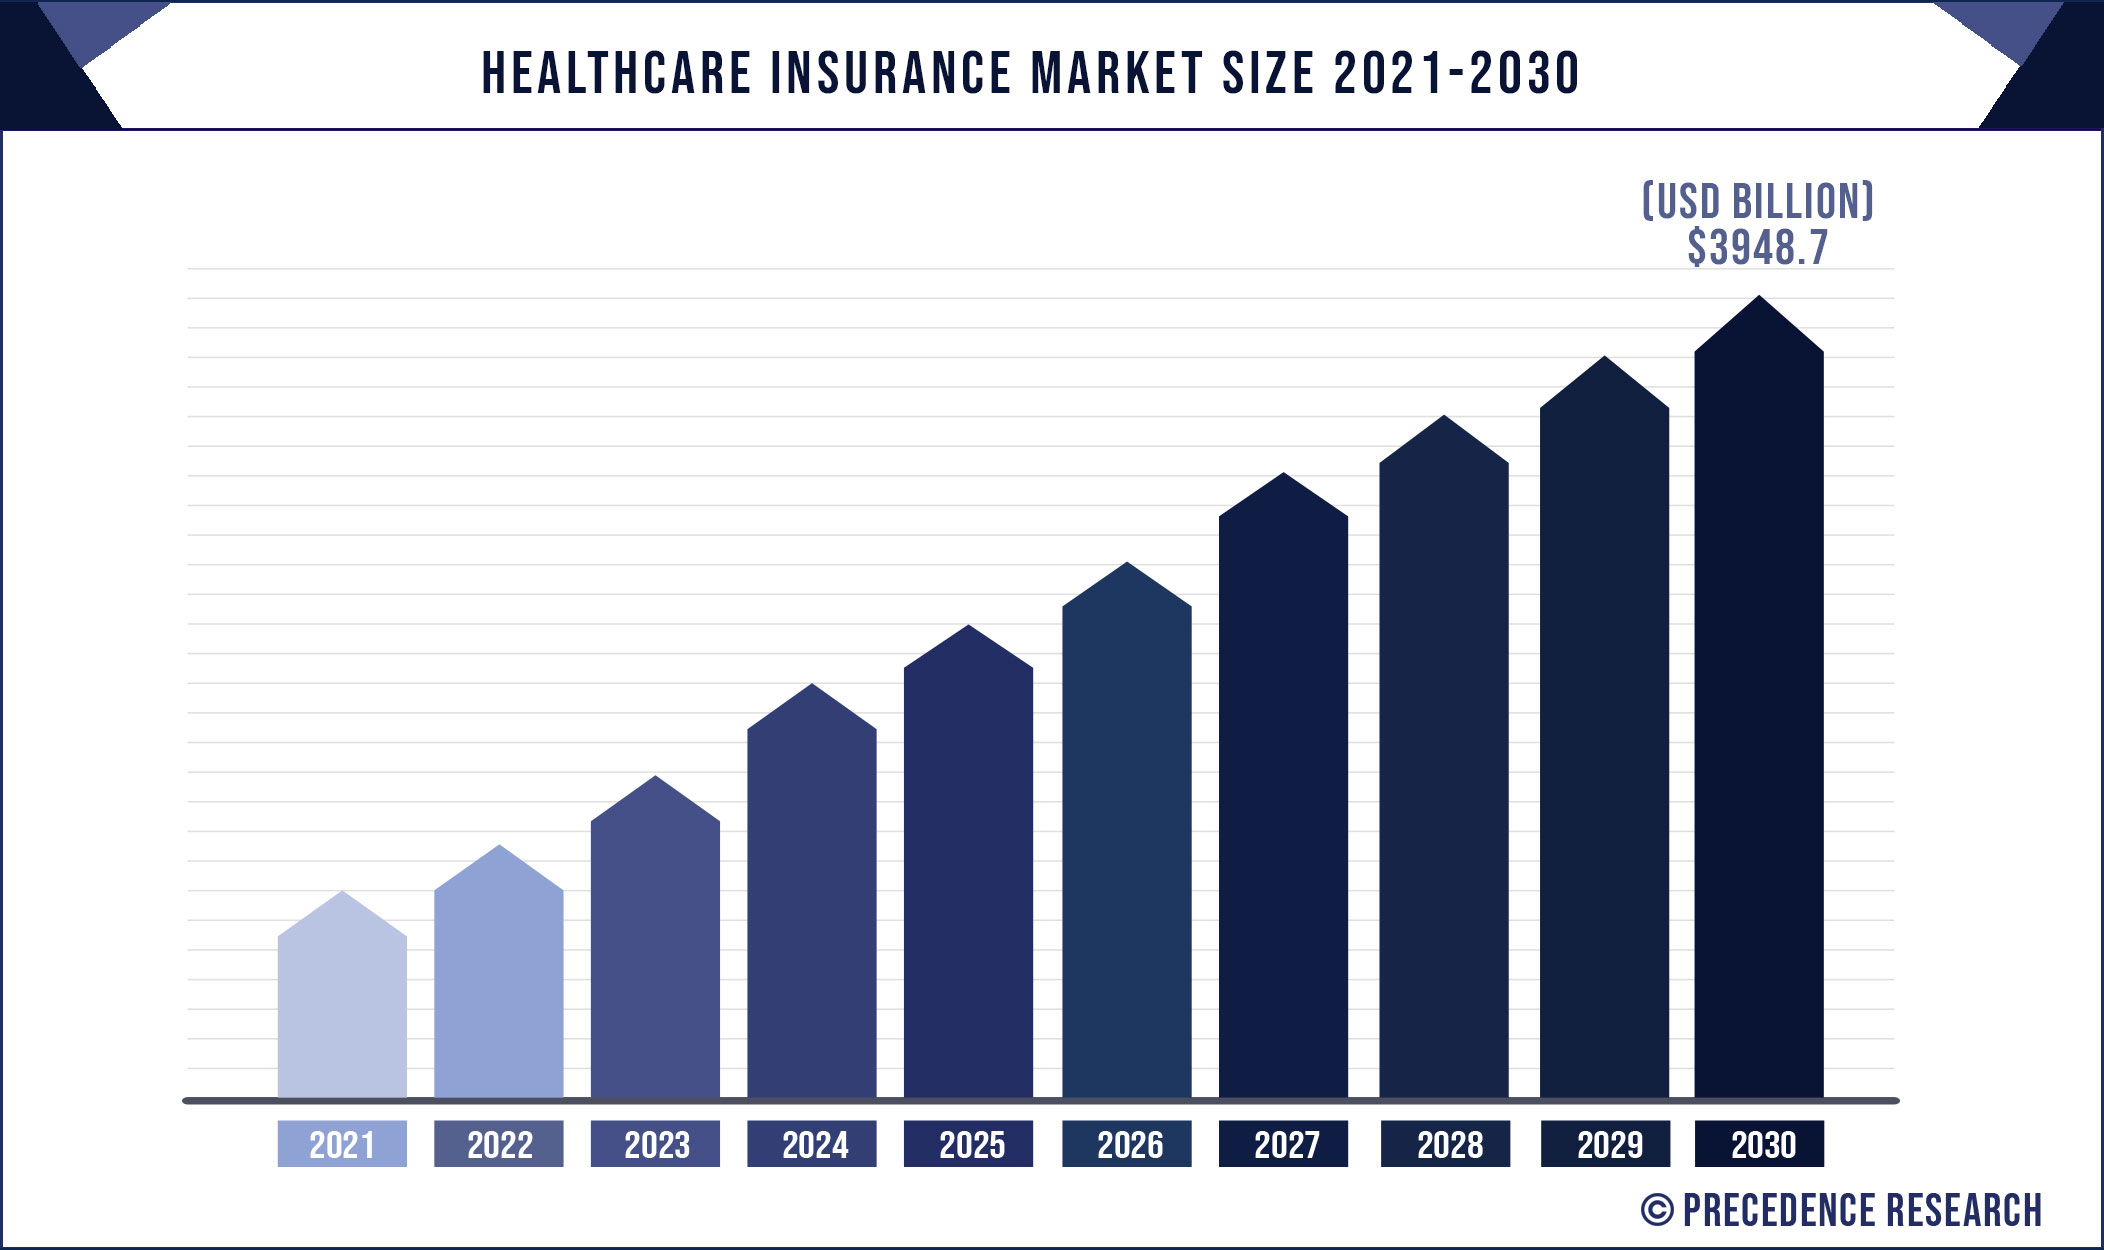 Healthcare Insurance Market to Outstrip $3,948.7 Billion by 2030